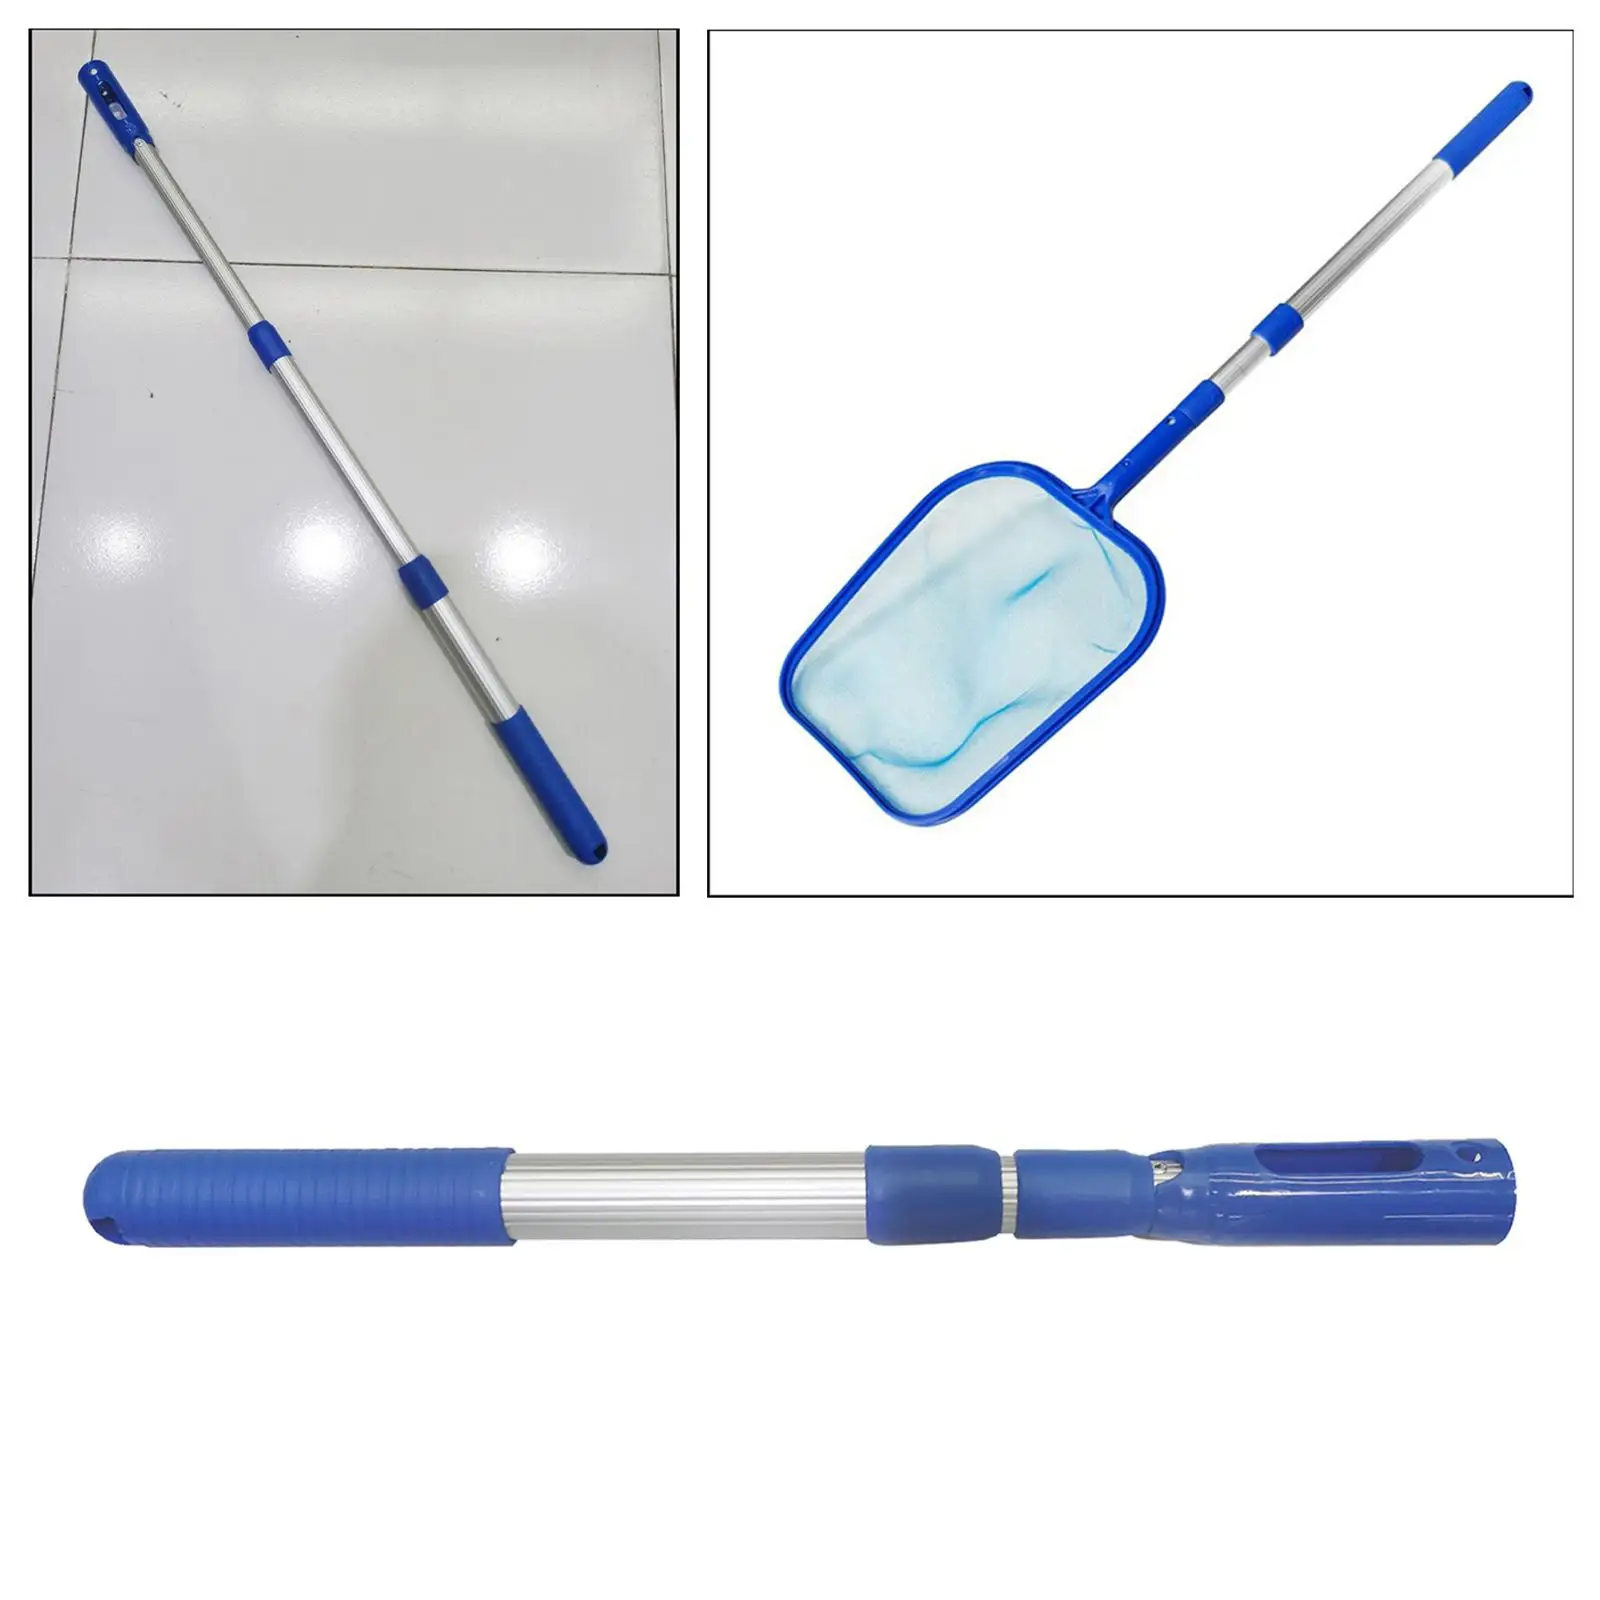 3-Stage Aluminum Spa Swimming Pool Extendable Pole for Leaf Net Durable